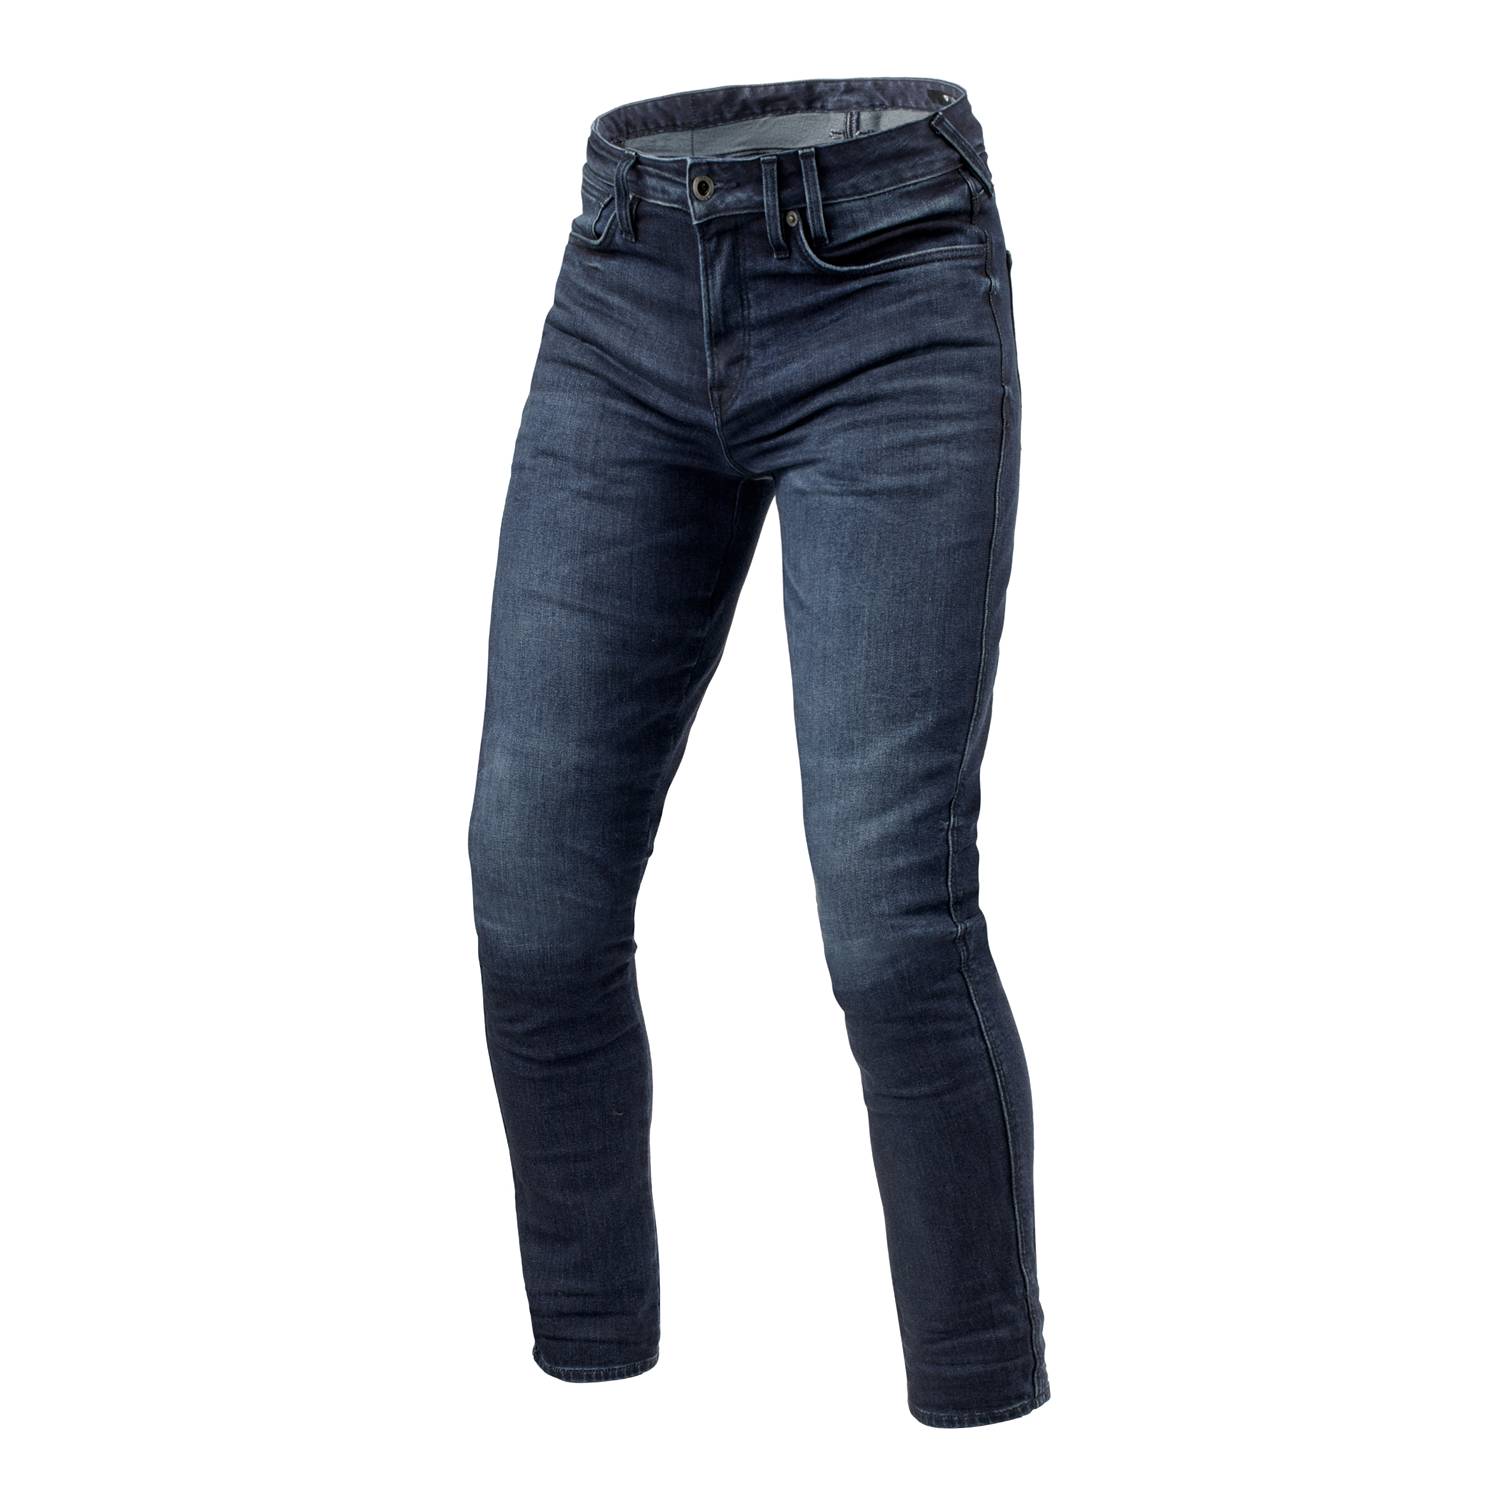 Image of EU REV'IT! Jeans Carlin SK Dark Blue Used L34 Motorcycle Jeans Taille L34/W32